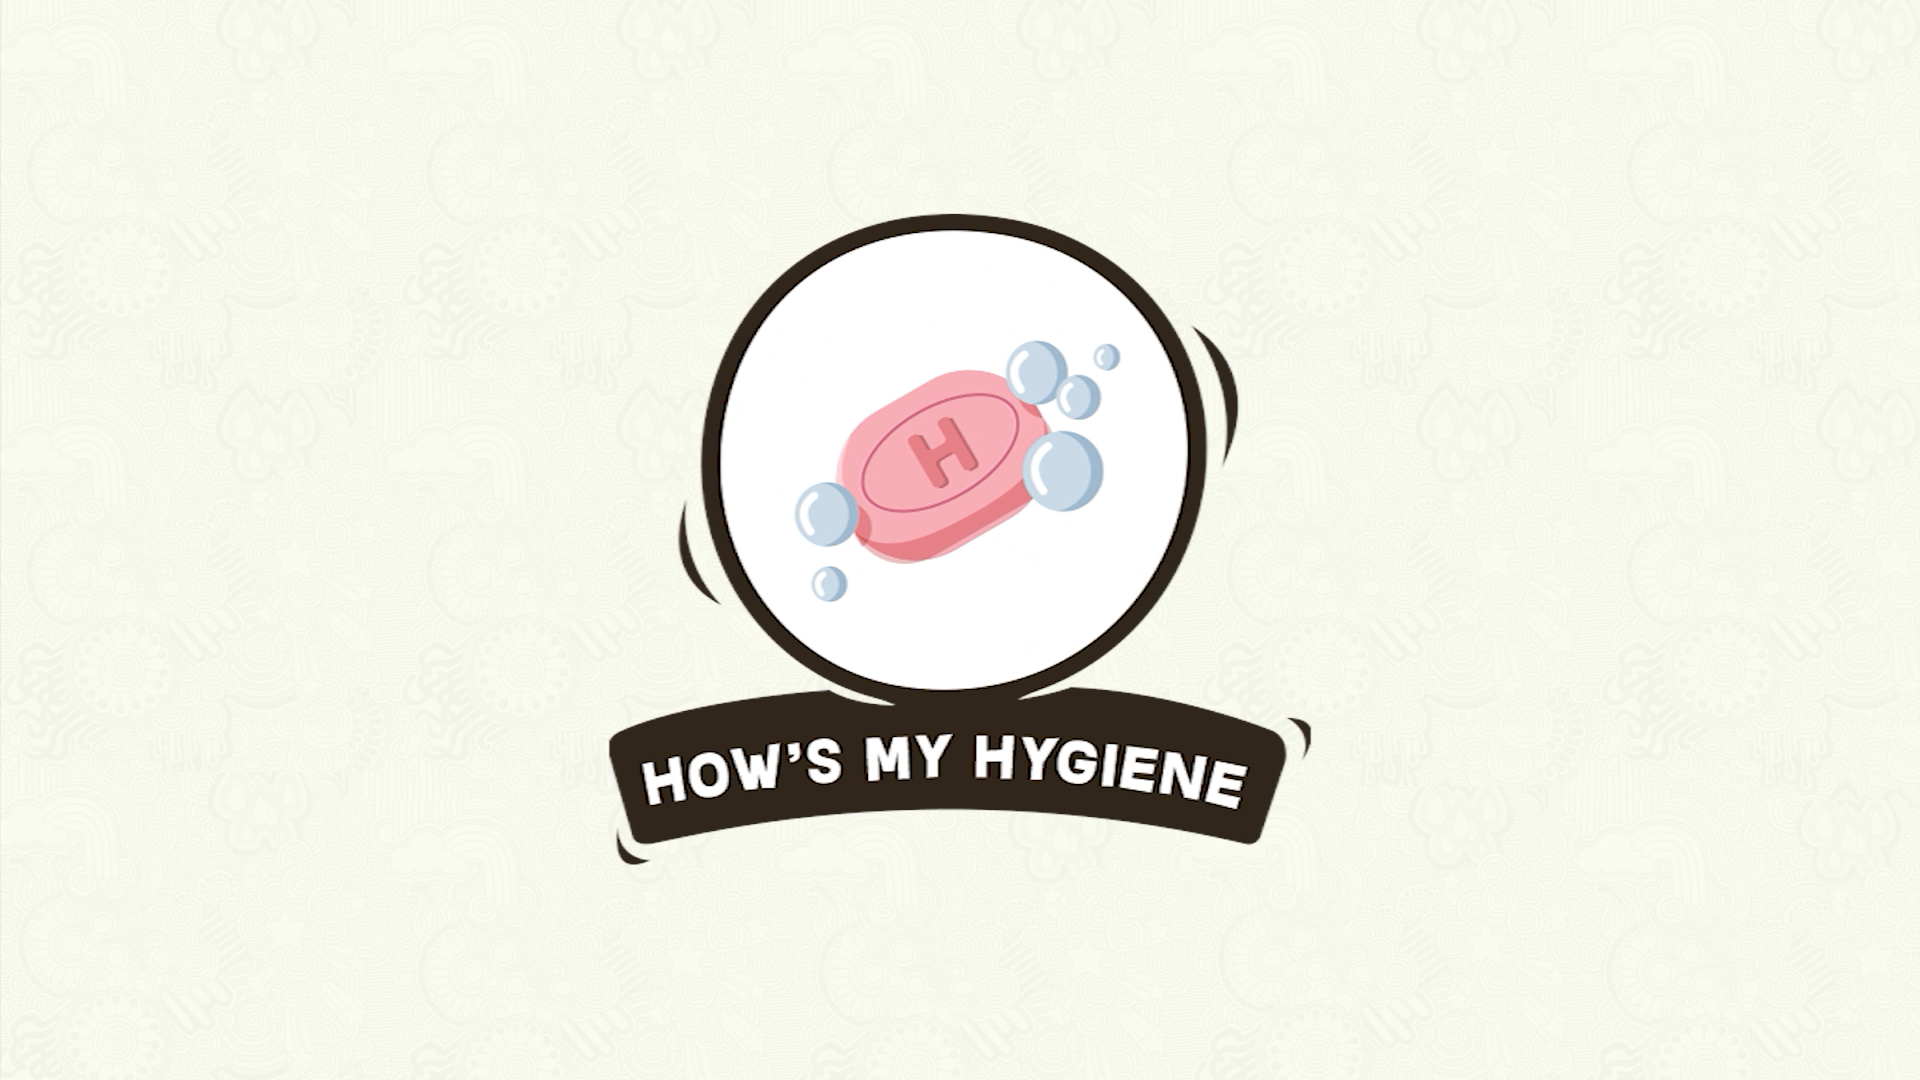 Teaching Good Hygiene: A Guide for Middle School Educators